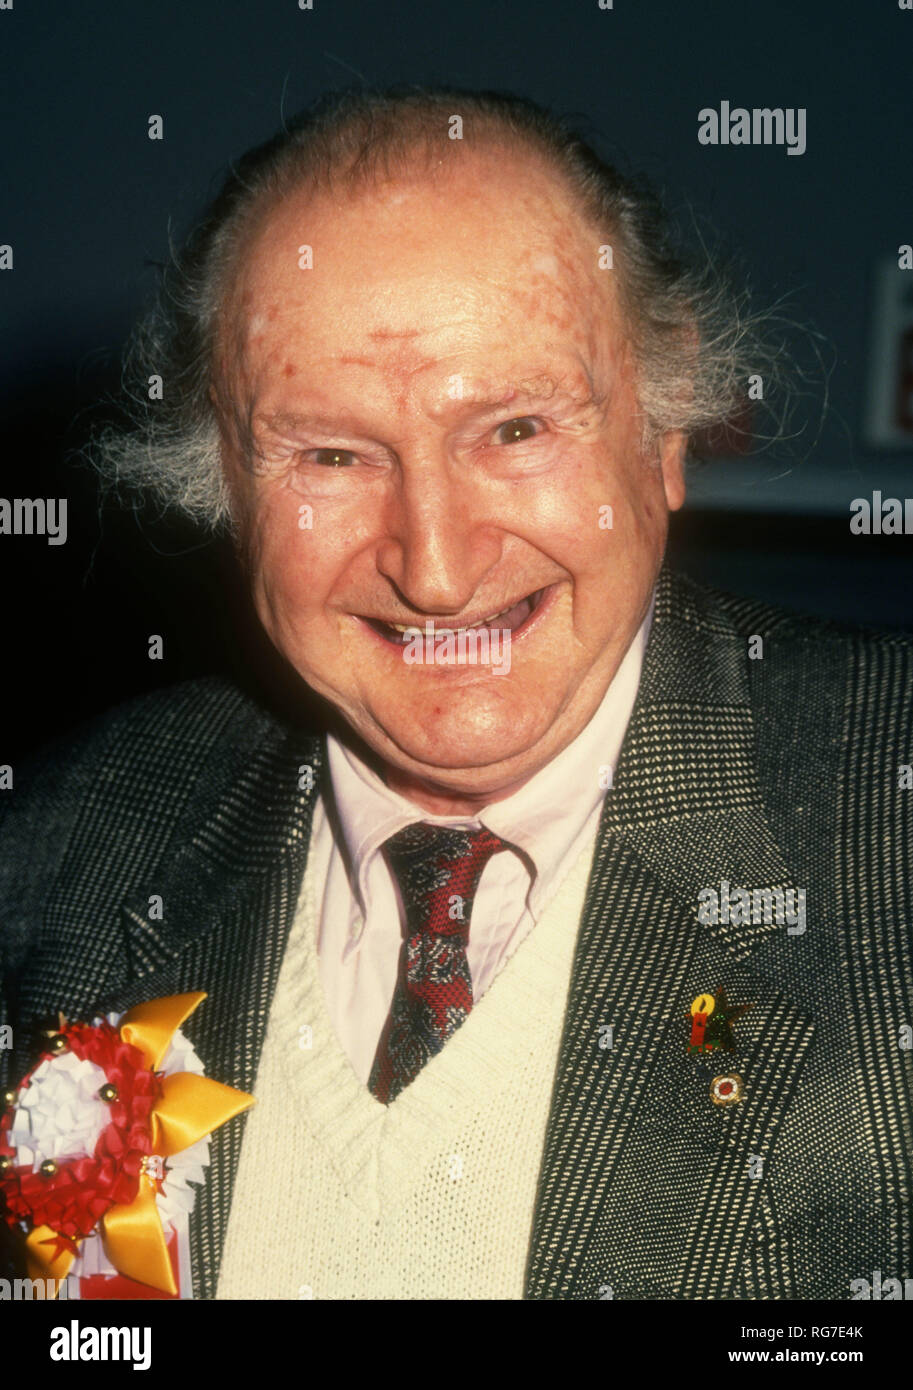 HOLLYWOOD, CA - NOVEMBER 28: Actor Al Lewis attends the 62nd Annual Hollywood Christmas Parade on November 28, 1993 at KTLA Studios in Hollywood, California. Photo by Barry King/Alamy Stock Photo Stock Photo